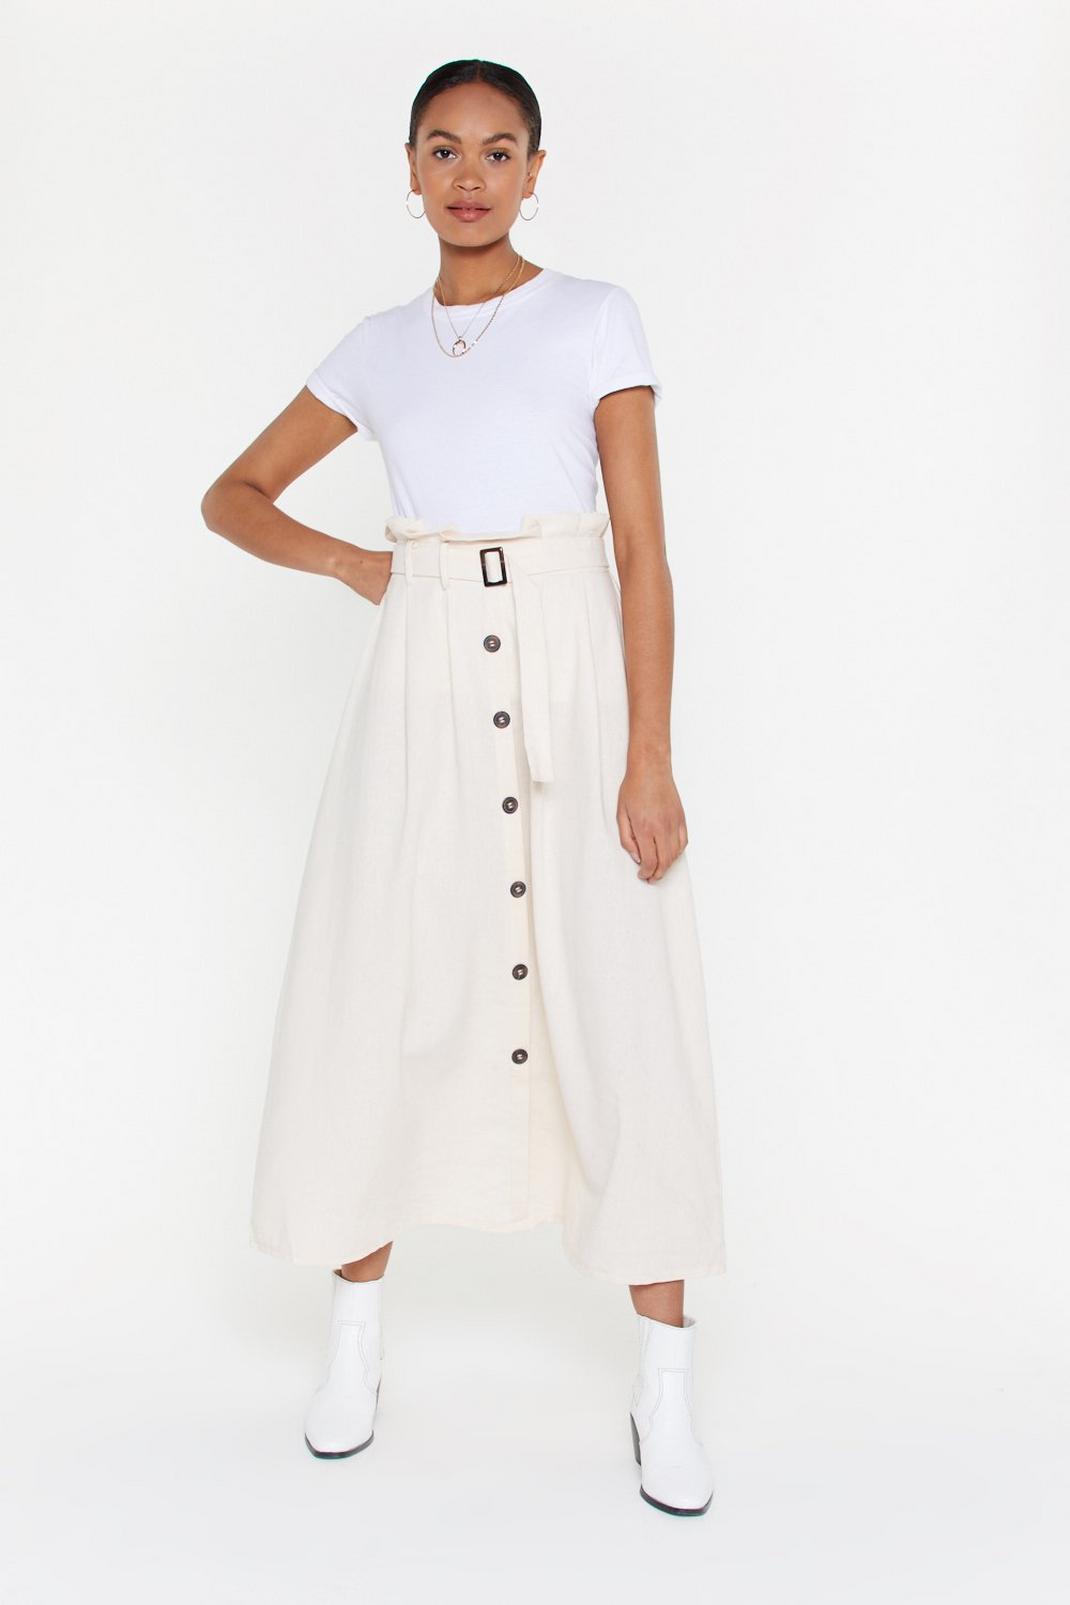 It's About to Go Button-Down Maxi Skirt image number 1